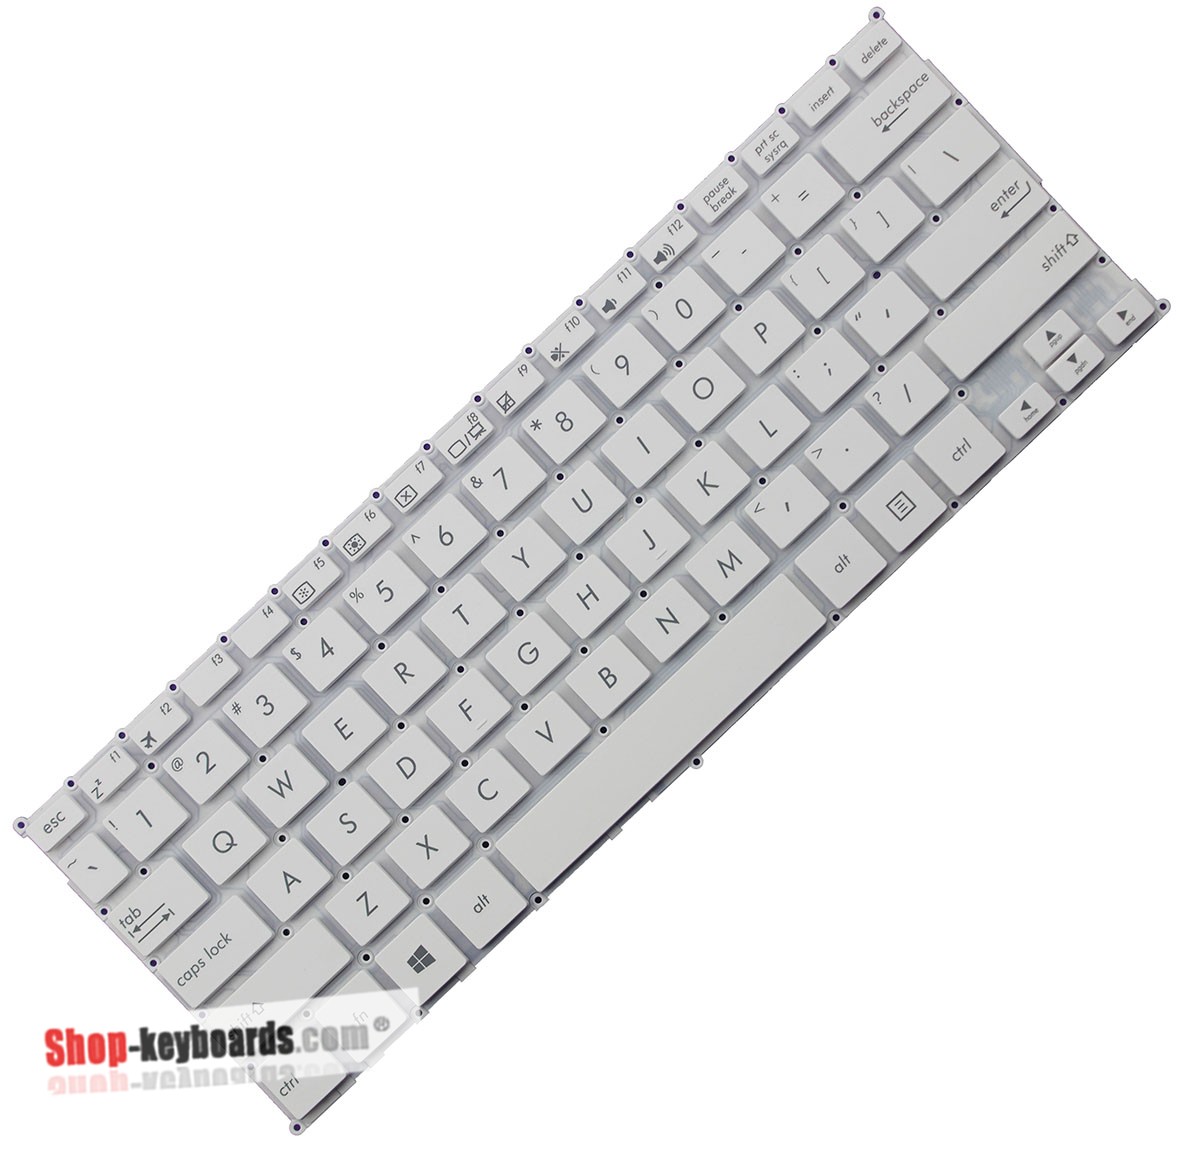 Asus 0KNL0-1122ND00 Keyboard replacement